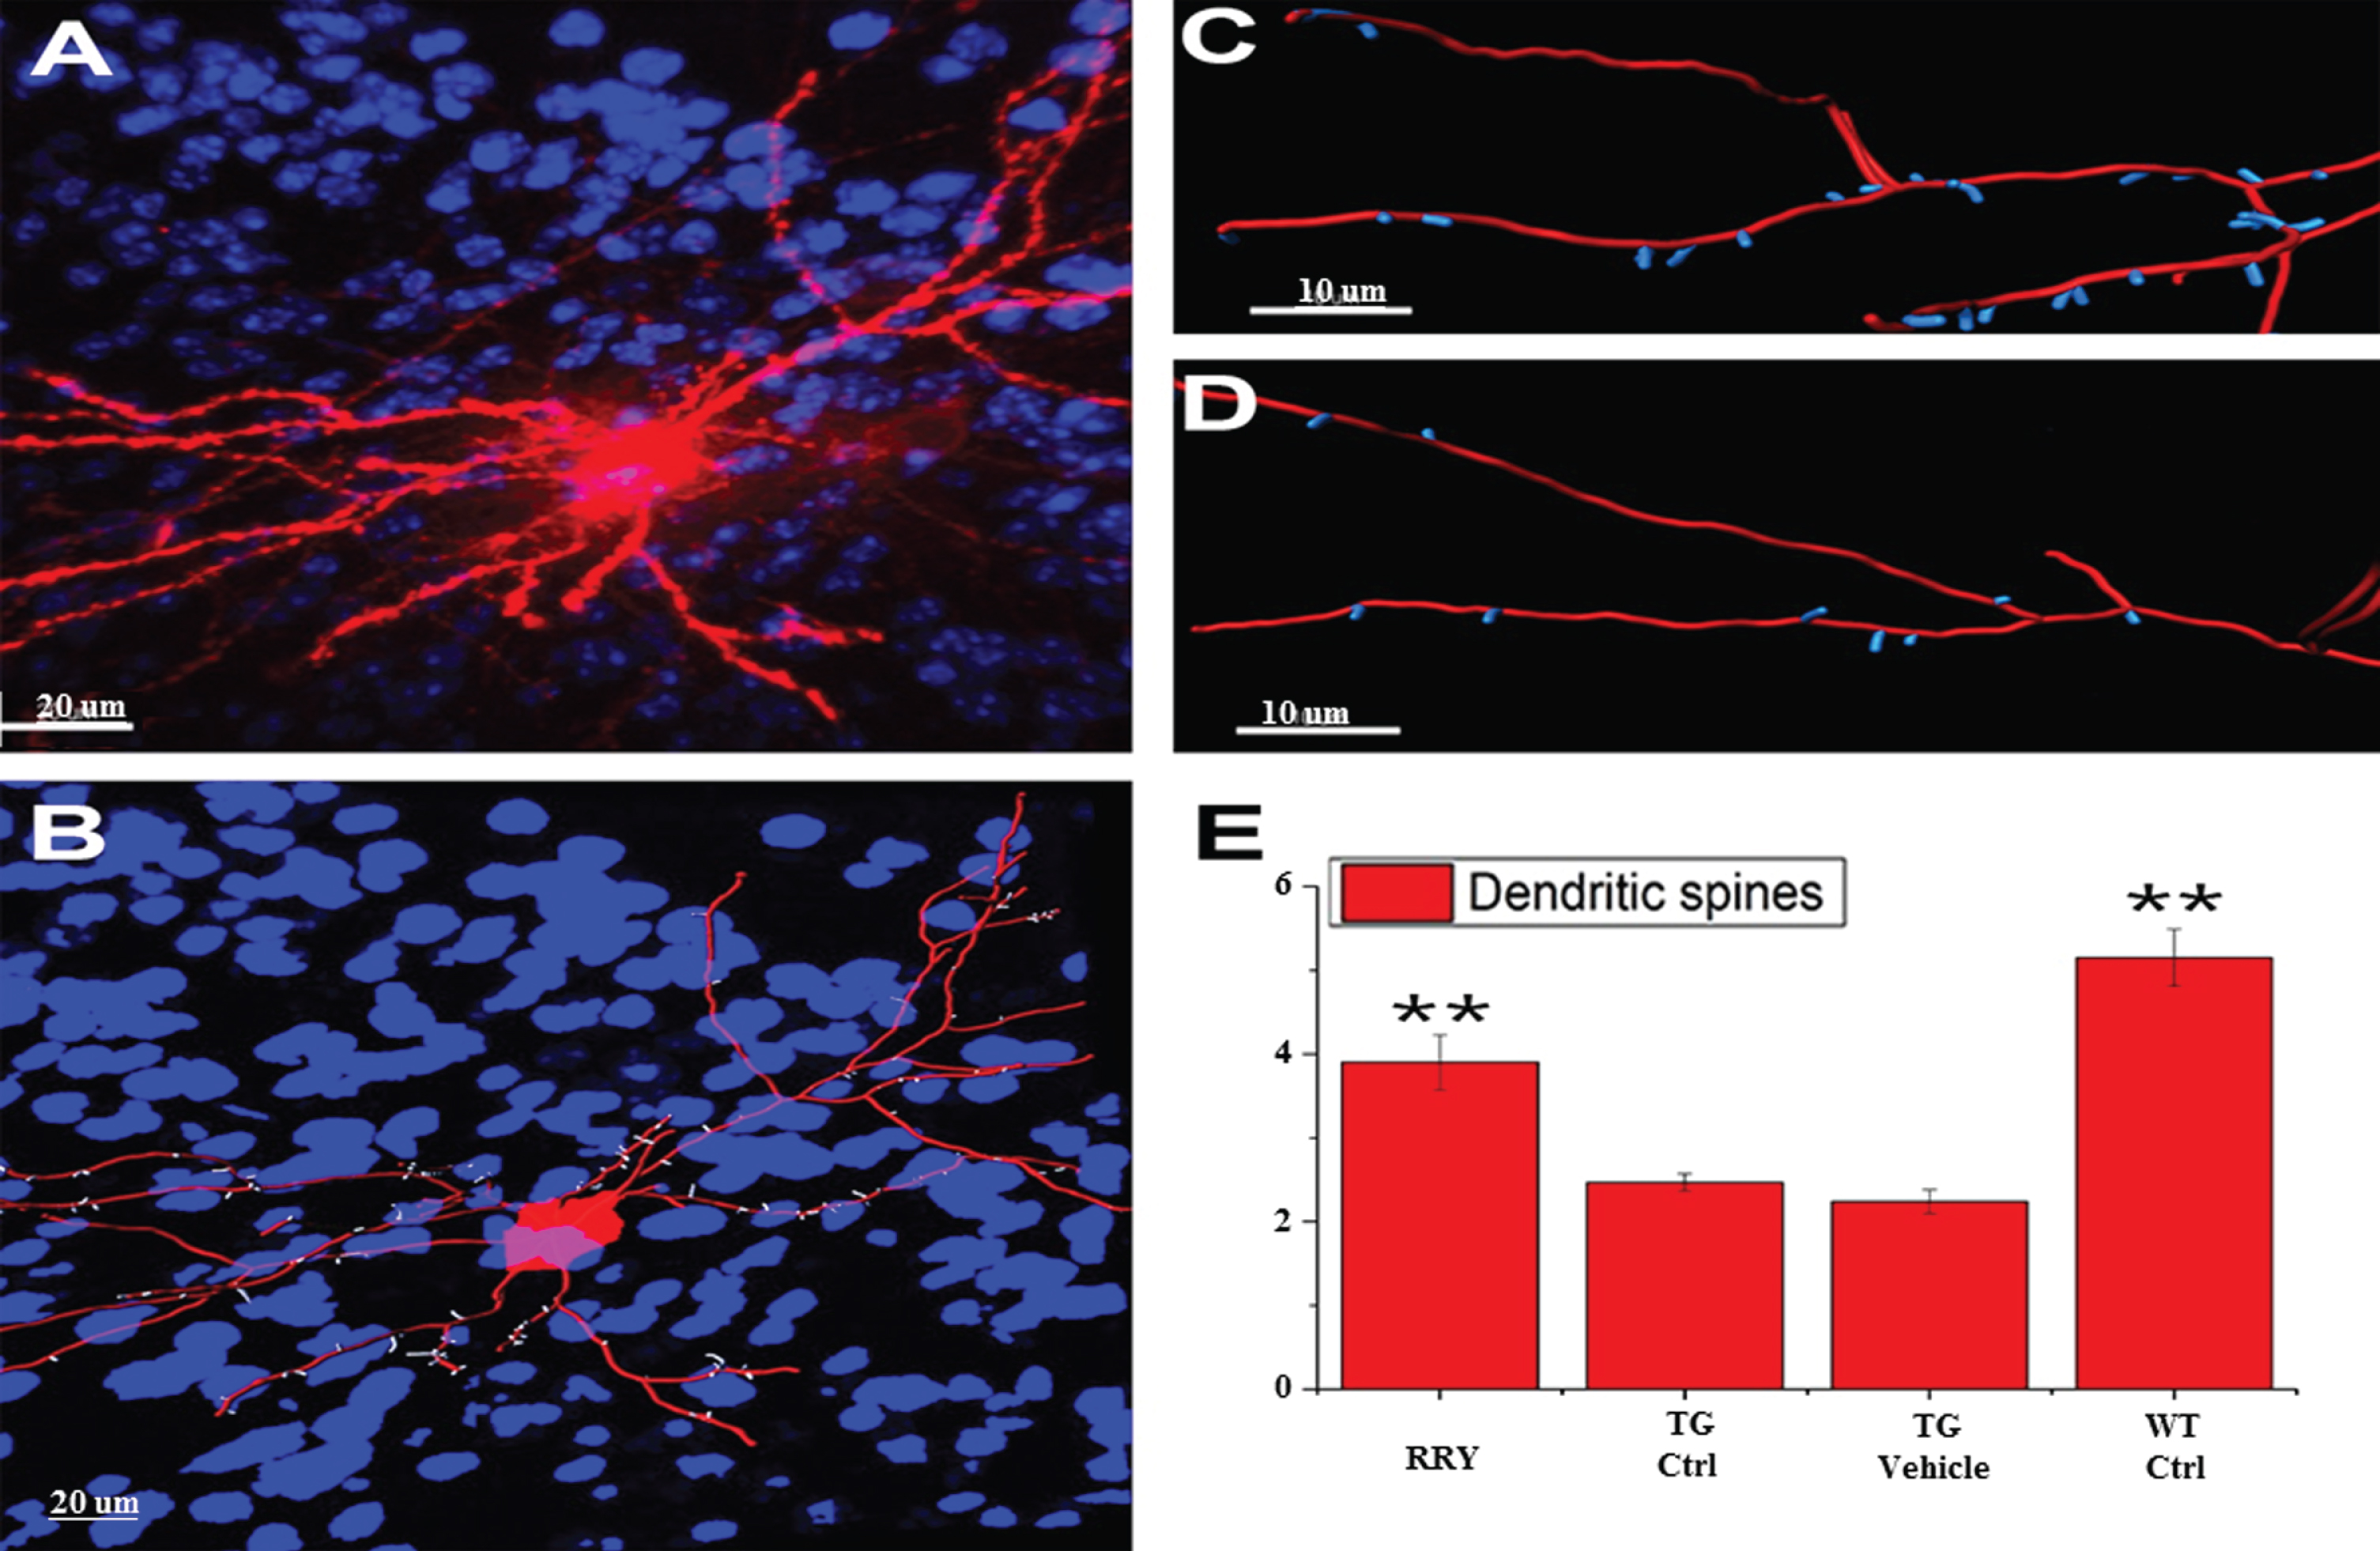 Demonstration of the reconstruction and quantification of the DiI-labeled neuron in mice and increase in the density of the dendritic spines by RRY in the brains of the APP/PS1 transgenic mice. A) An image of DiI-labeled neuron in the brain of the APP/PS1 Tg mouse administered with RRY (Red: DiI, Blue: DAPI). B) The reconstructed neuron of the APP/PS1 Tg mouse administered with RRY (Red: dendrites and cell body, Blue: nuclus of surrounding cells, white: dendritic spines). C and D showed the comparison of the density of the dendritic spines between the groups RRY (C) and Tg Ctrl (D). E) RRY increased the density of the dendritic spines in the dentate gyrus of the hippocampus of the APP/PS1 Tg mice compared to the groups Tg Ctrl and Tg Vehicle (n = 4, **p < 0.01).